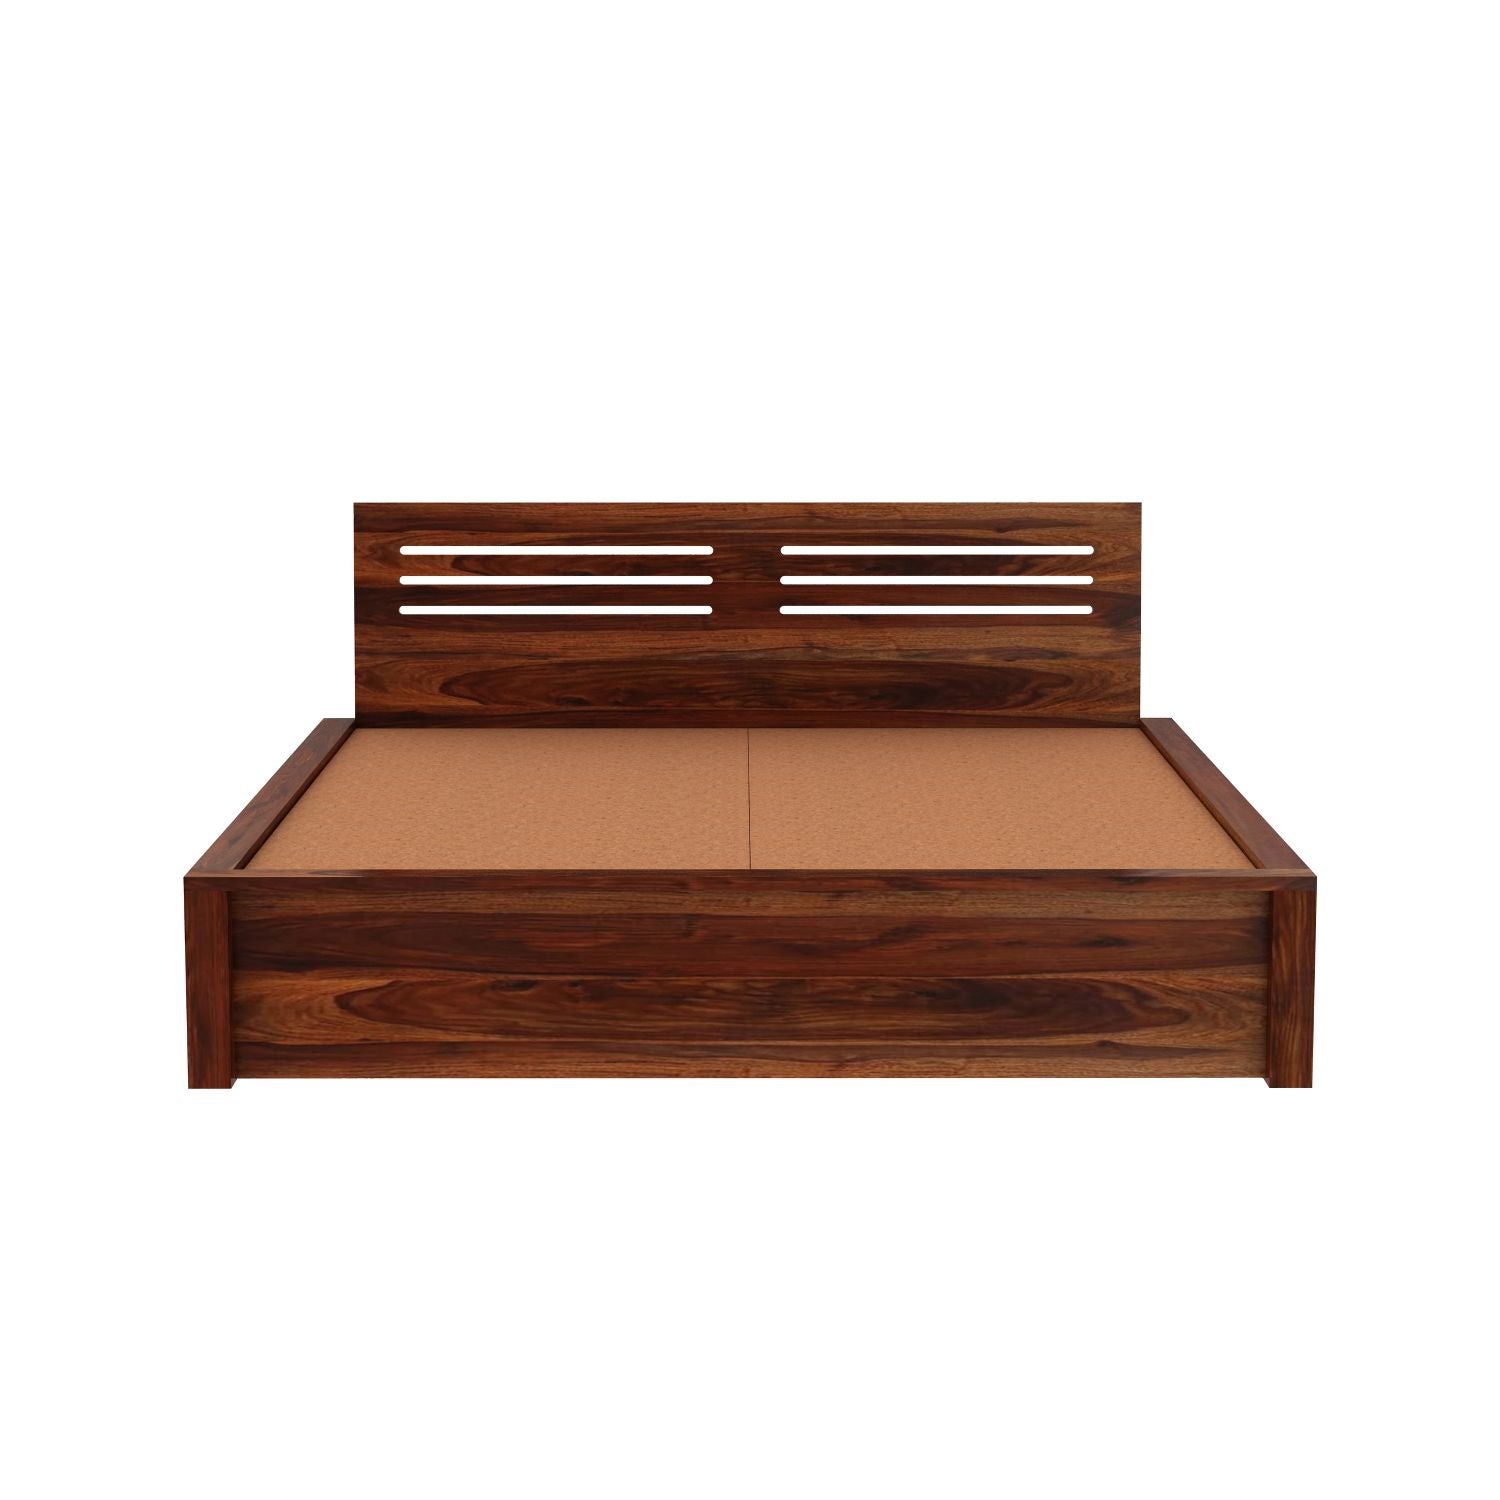 Due Solid Sheesham Wood Bed Without Storage (Queen Size, Natural Finish)